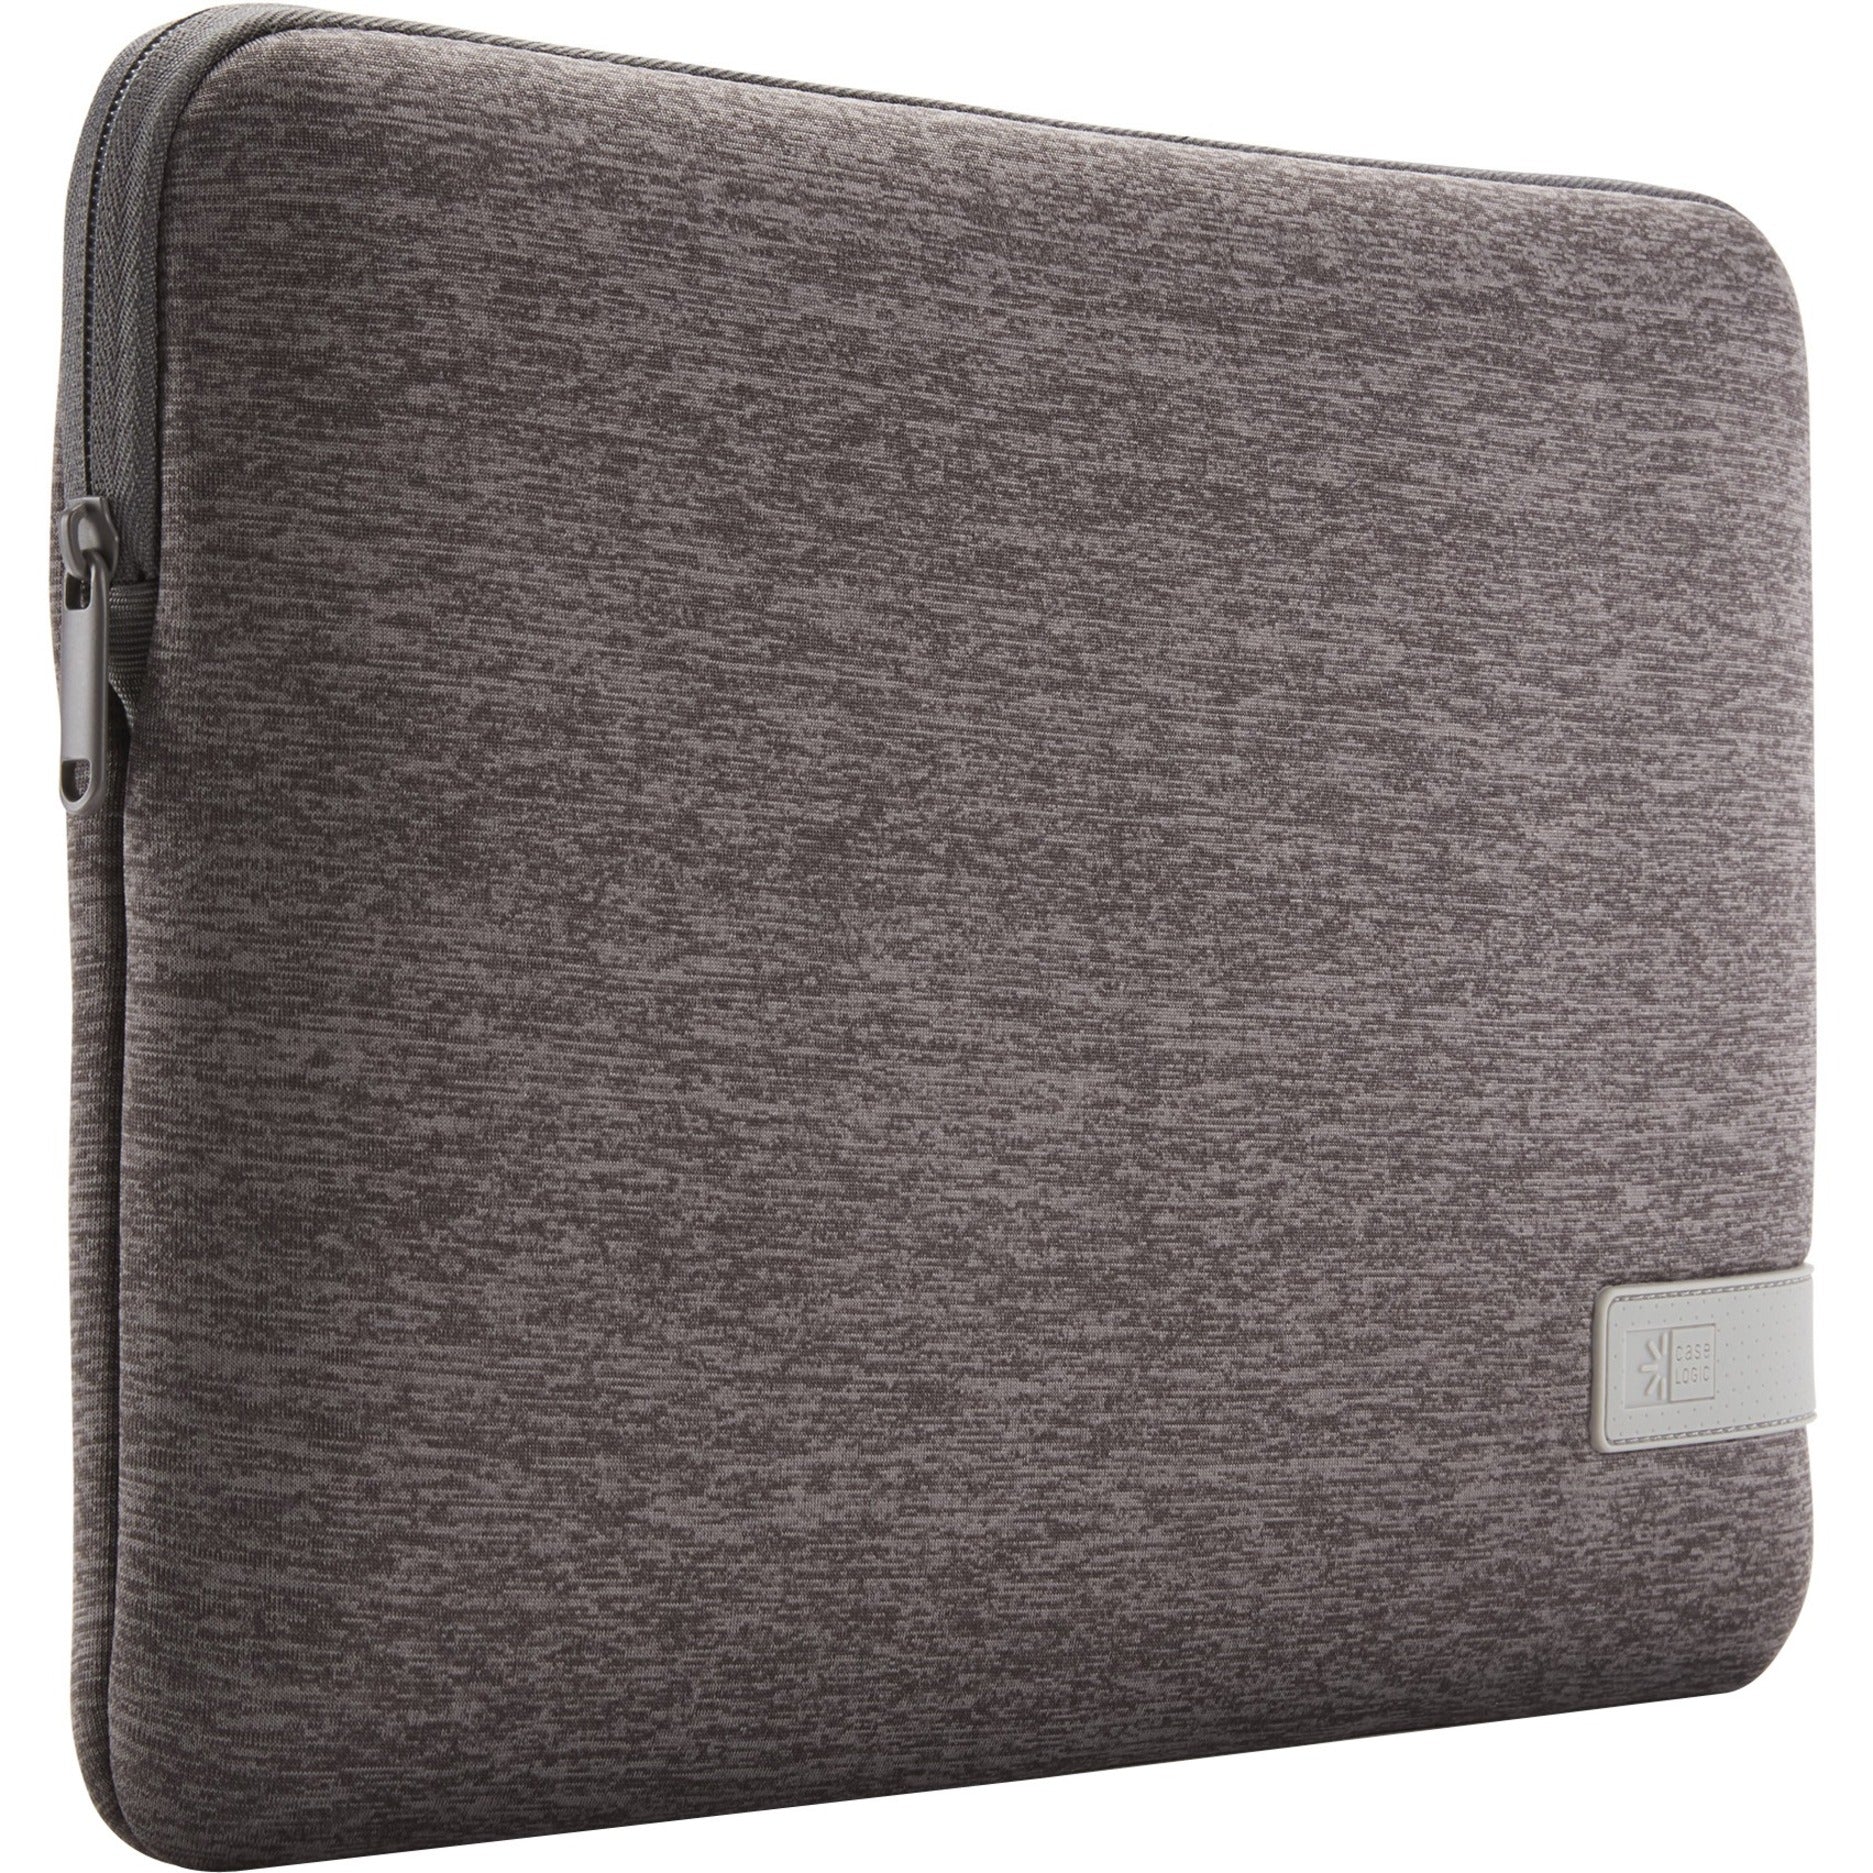 Case Logic 3204121 Reflect REFPC-113 Carrying Case Sleeve for 13.3" Notebook, Graphite